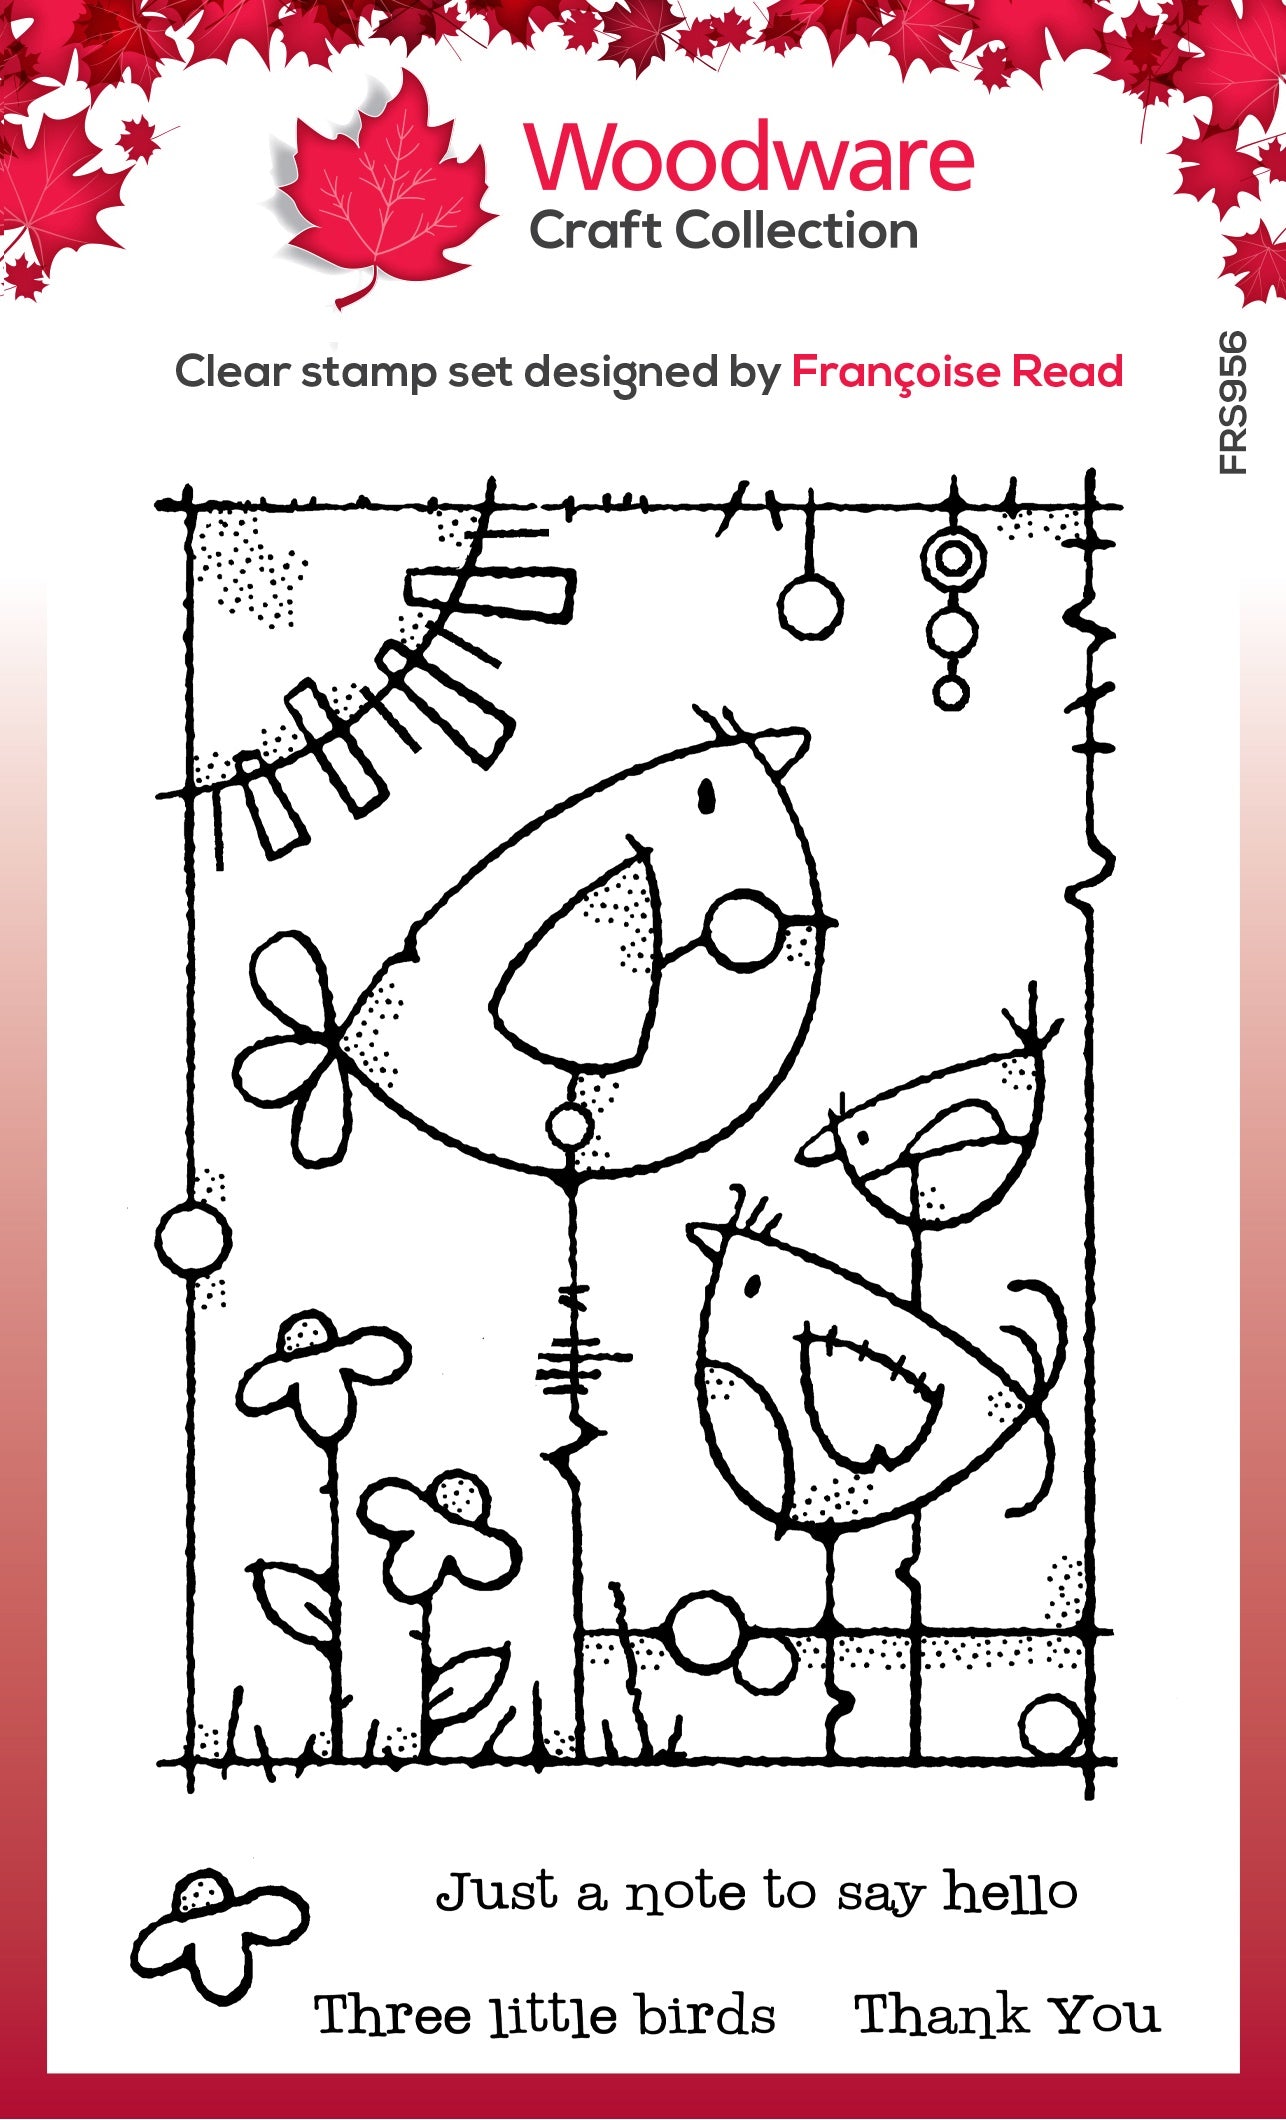 Three Little Birds - Clear Stamp - Woodware Craft Collection - 4x6